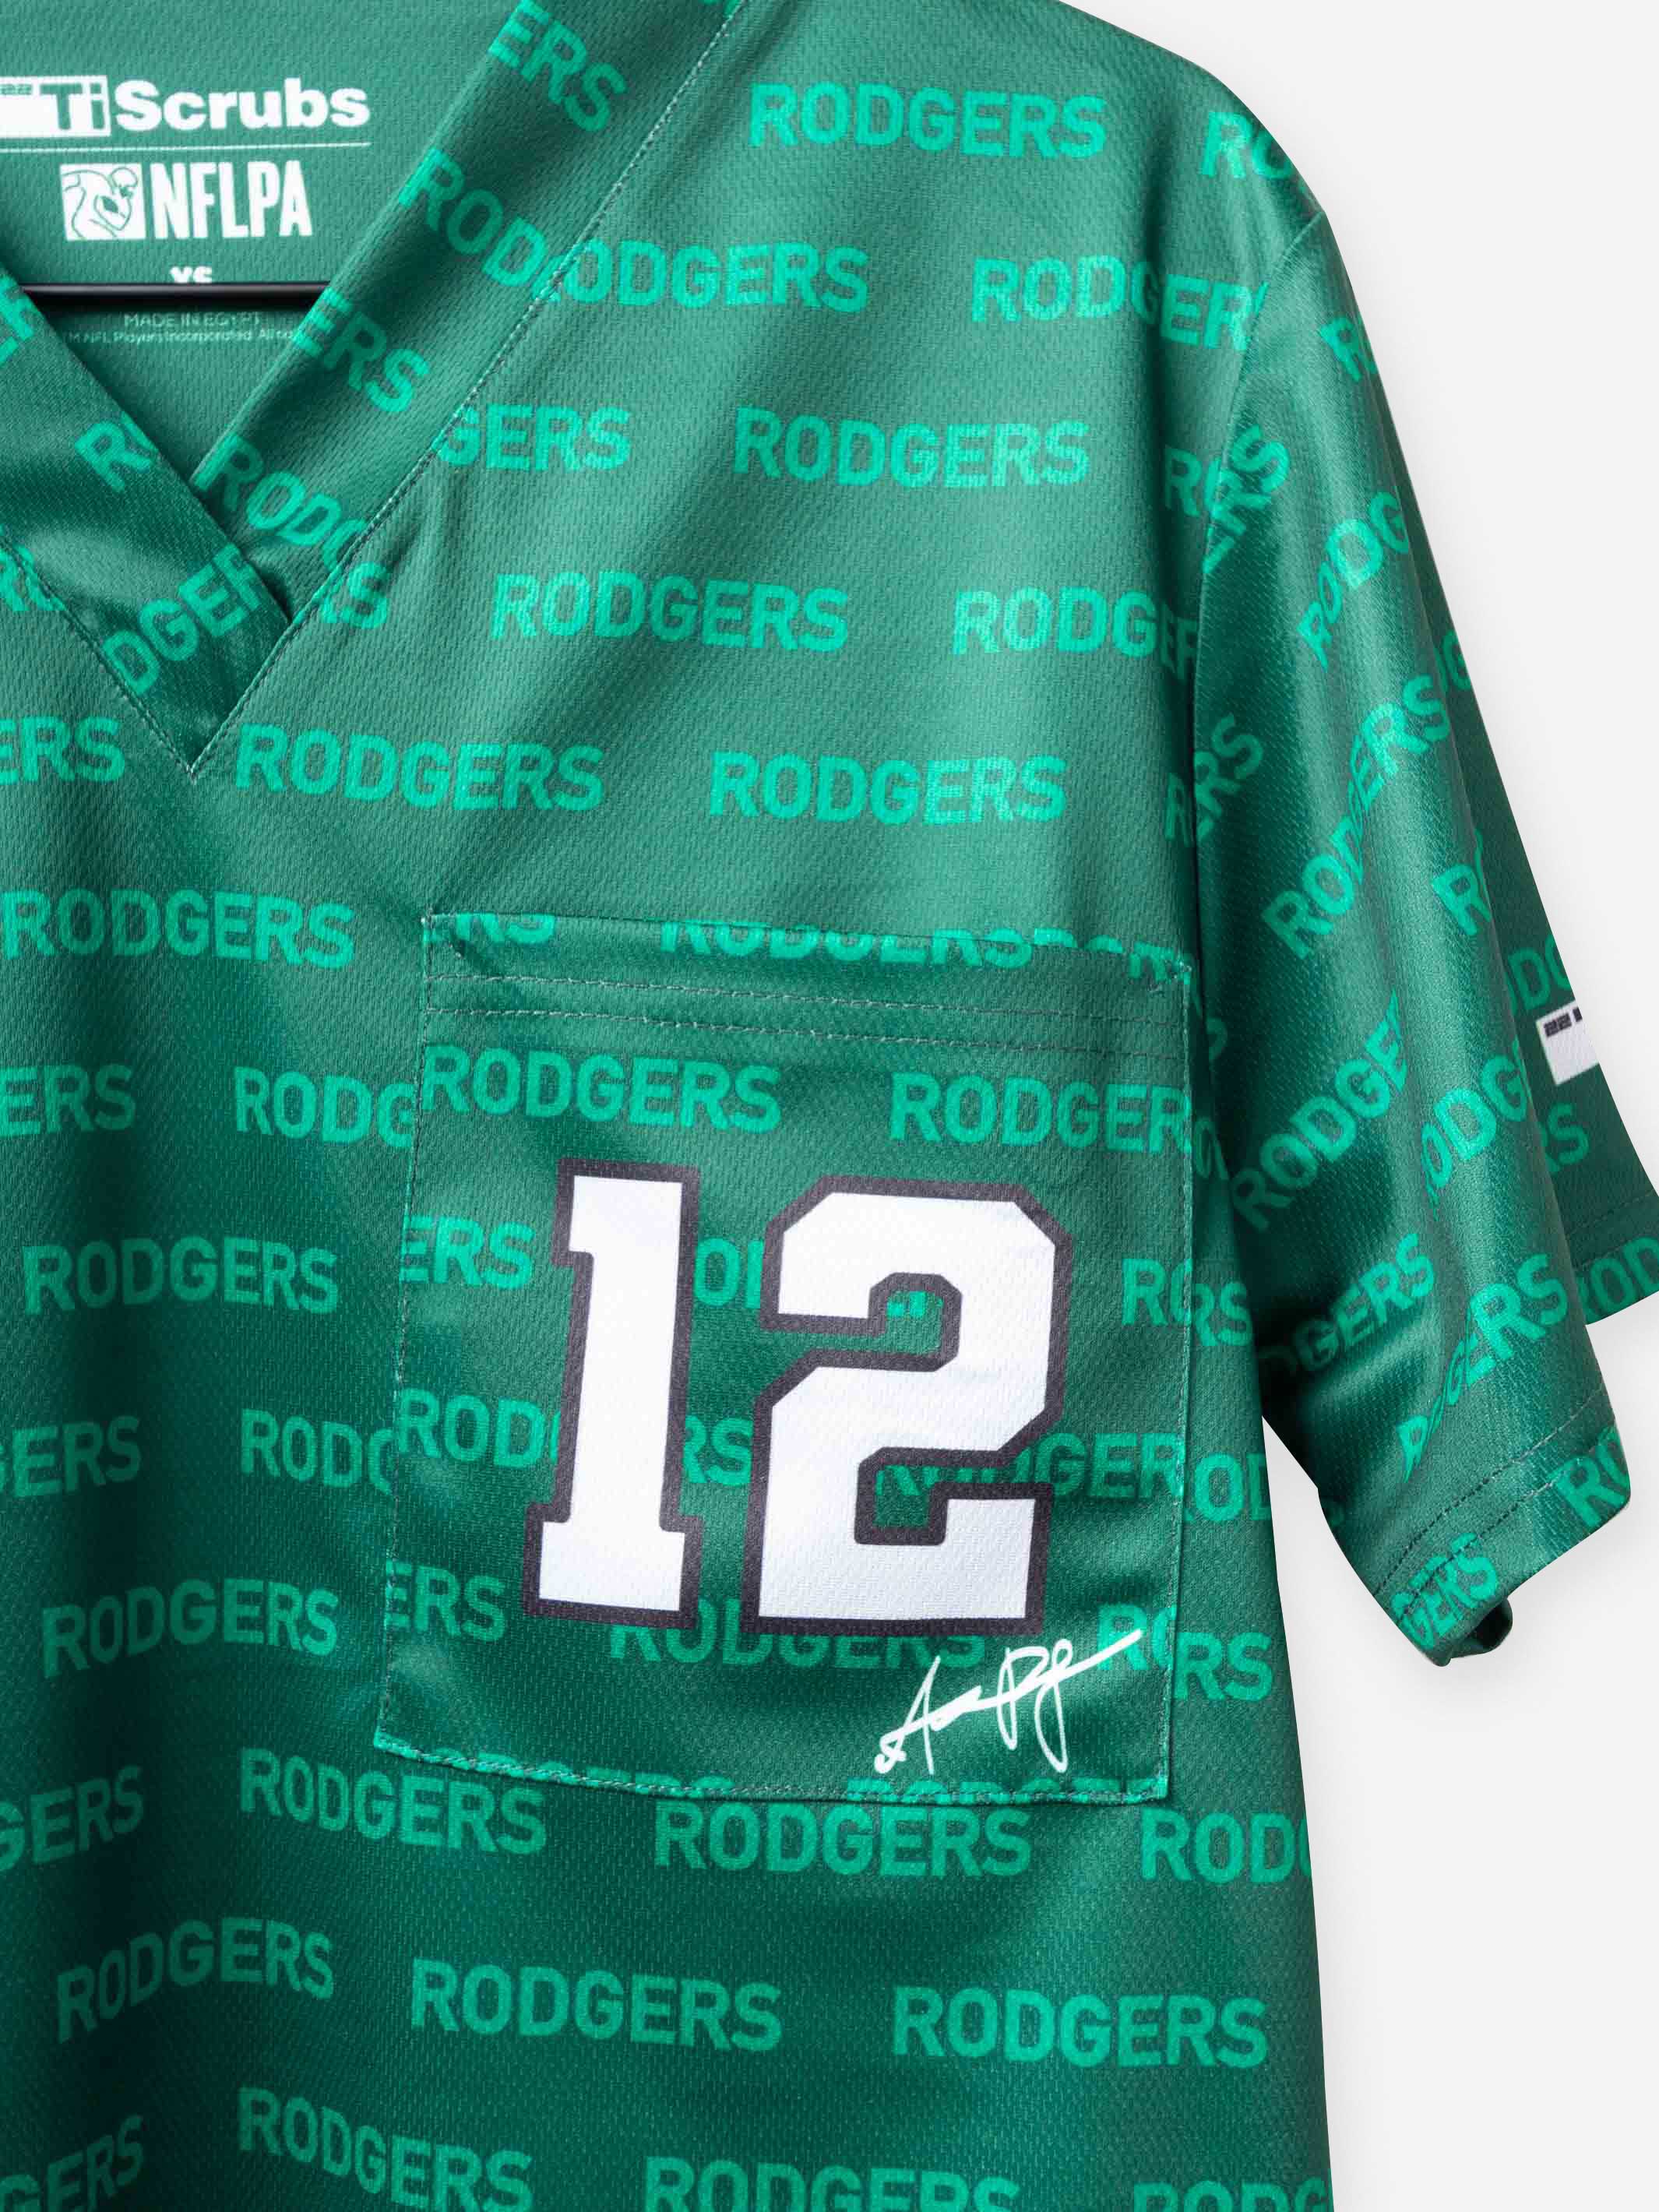 Men's Aaron Rodgers Jersey Scrub Top in Green with signature 